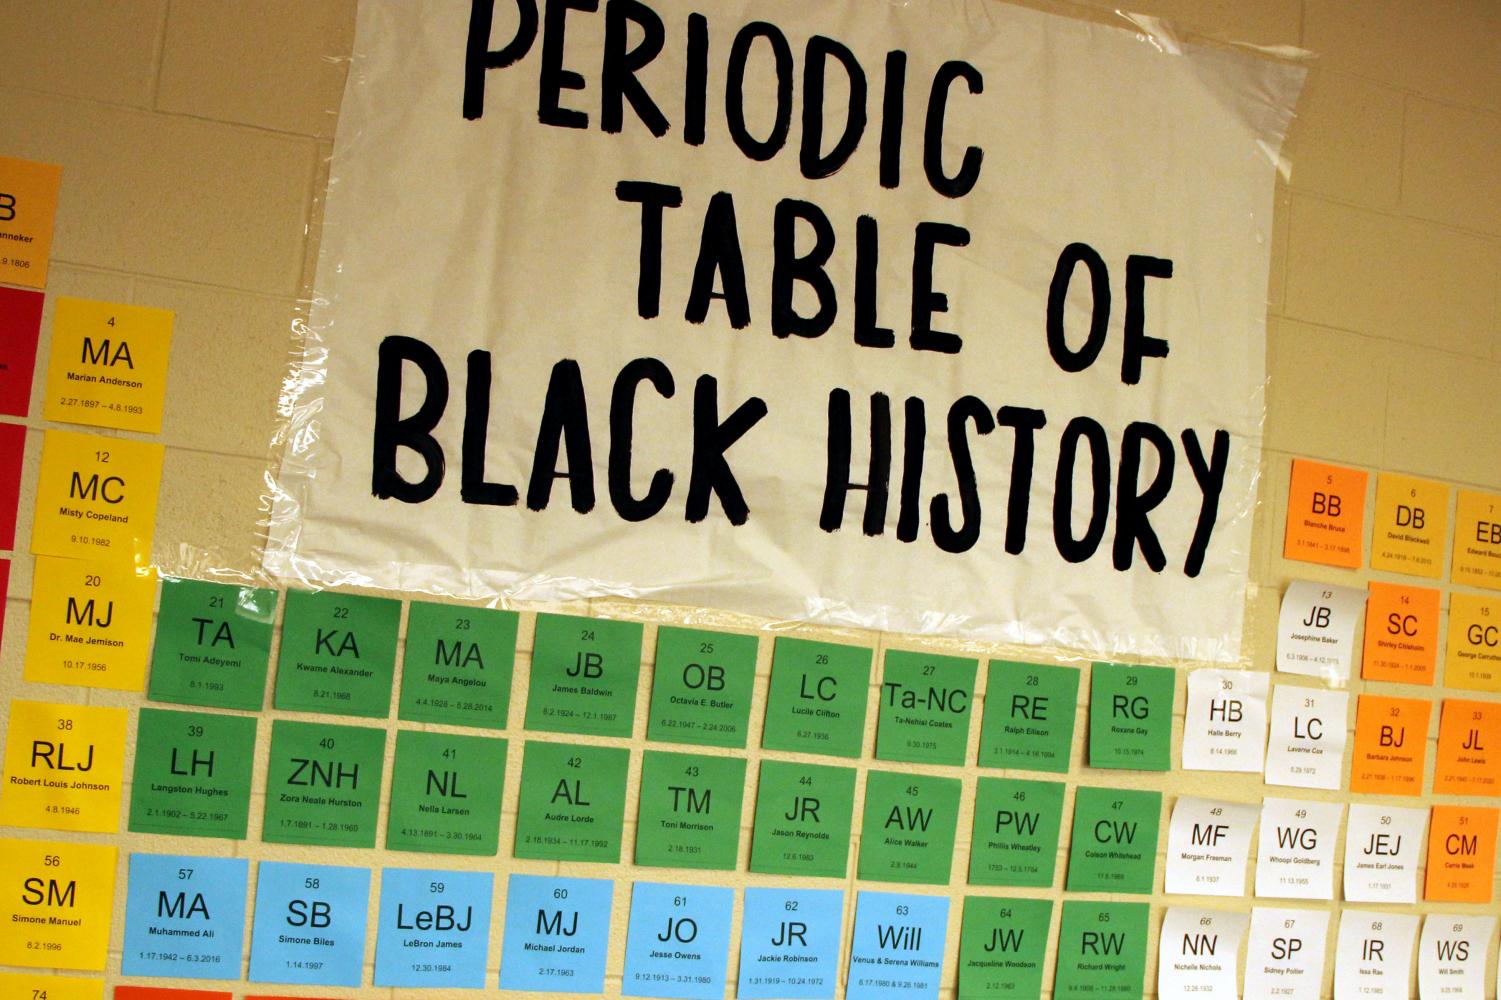 A bulletin board says Periodic Table of Black History. It has little boxes like on a periodic table but they have initials and names of famous Black people on it.